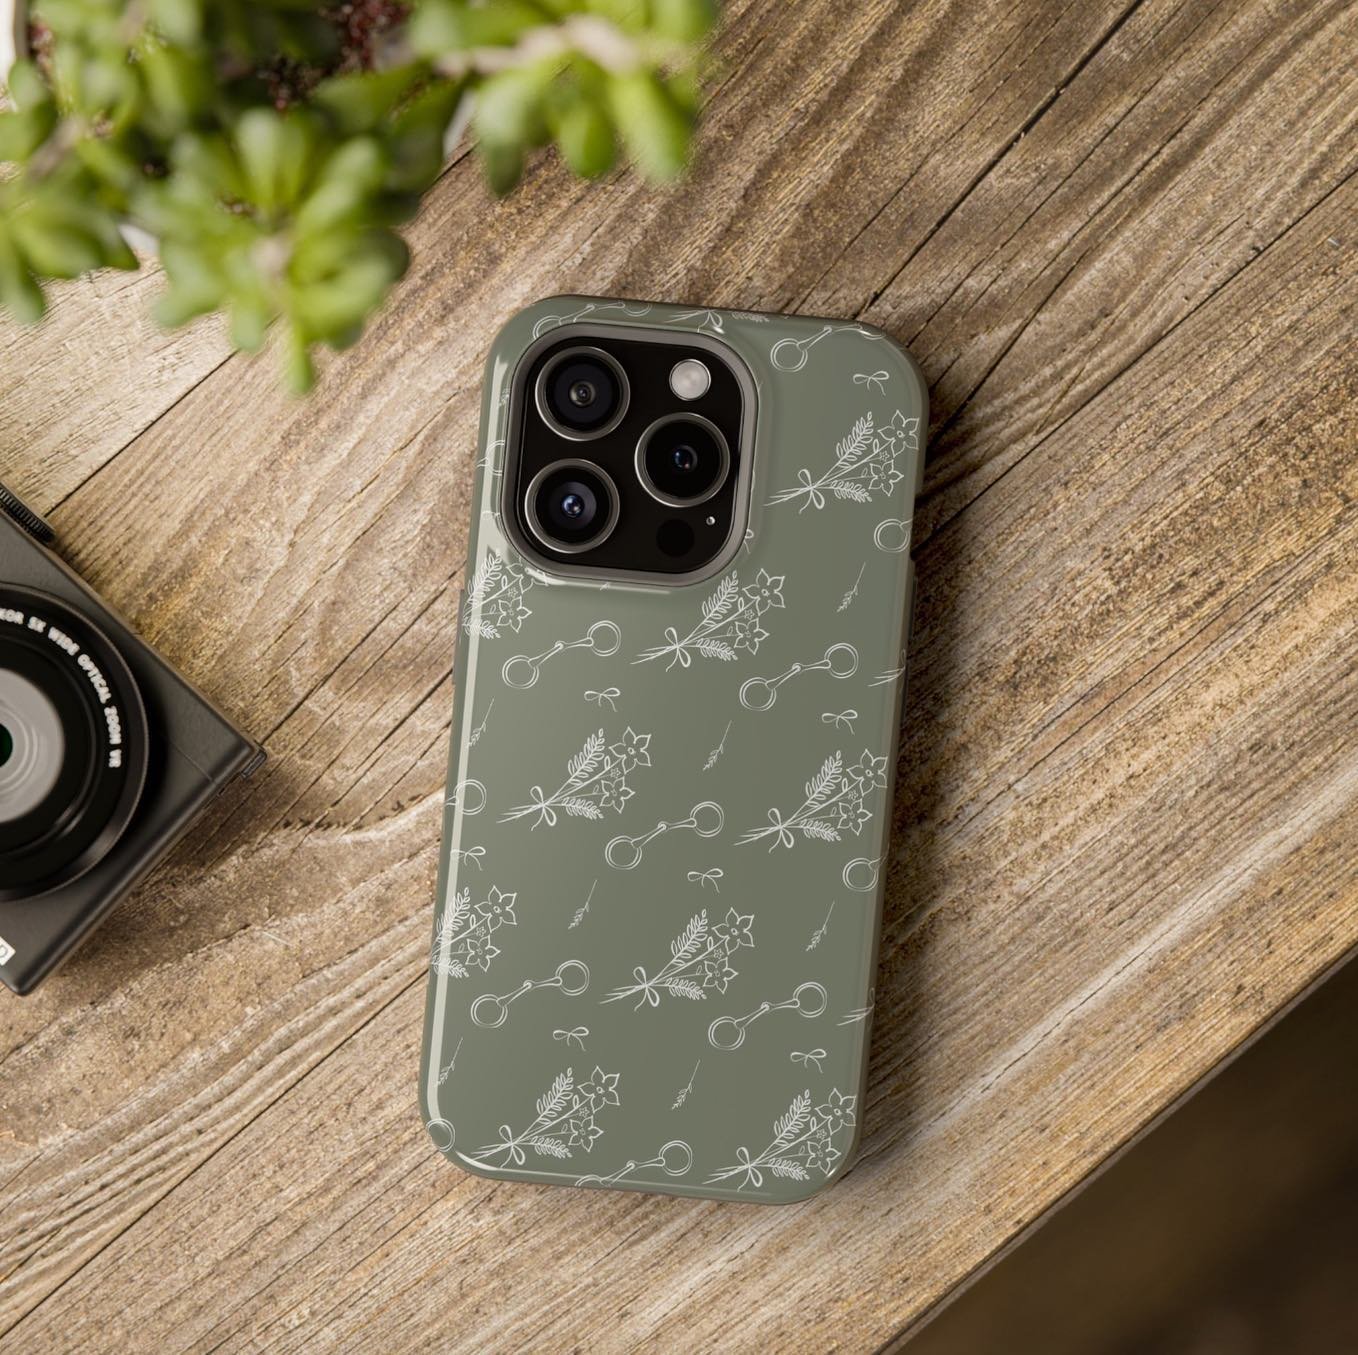 Well I did a thing 🤭

Wild Horse Creative has created it&rsquo;s first physical product 🥳

Introducing The Bitsy pattern, on a cell phone cover! It was so fun getting feedback yesterday on which colors you liked and what you might be interested in 